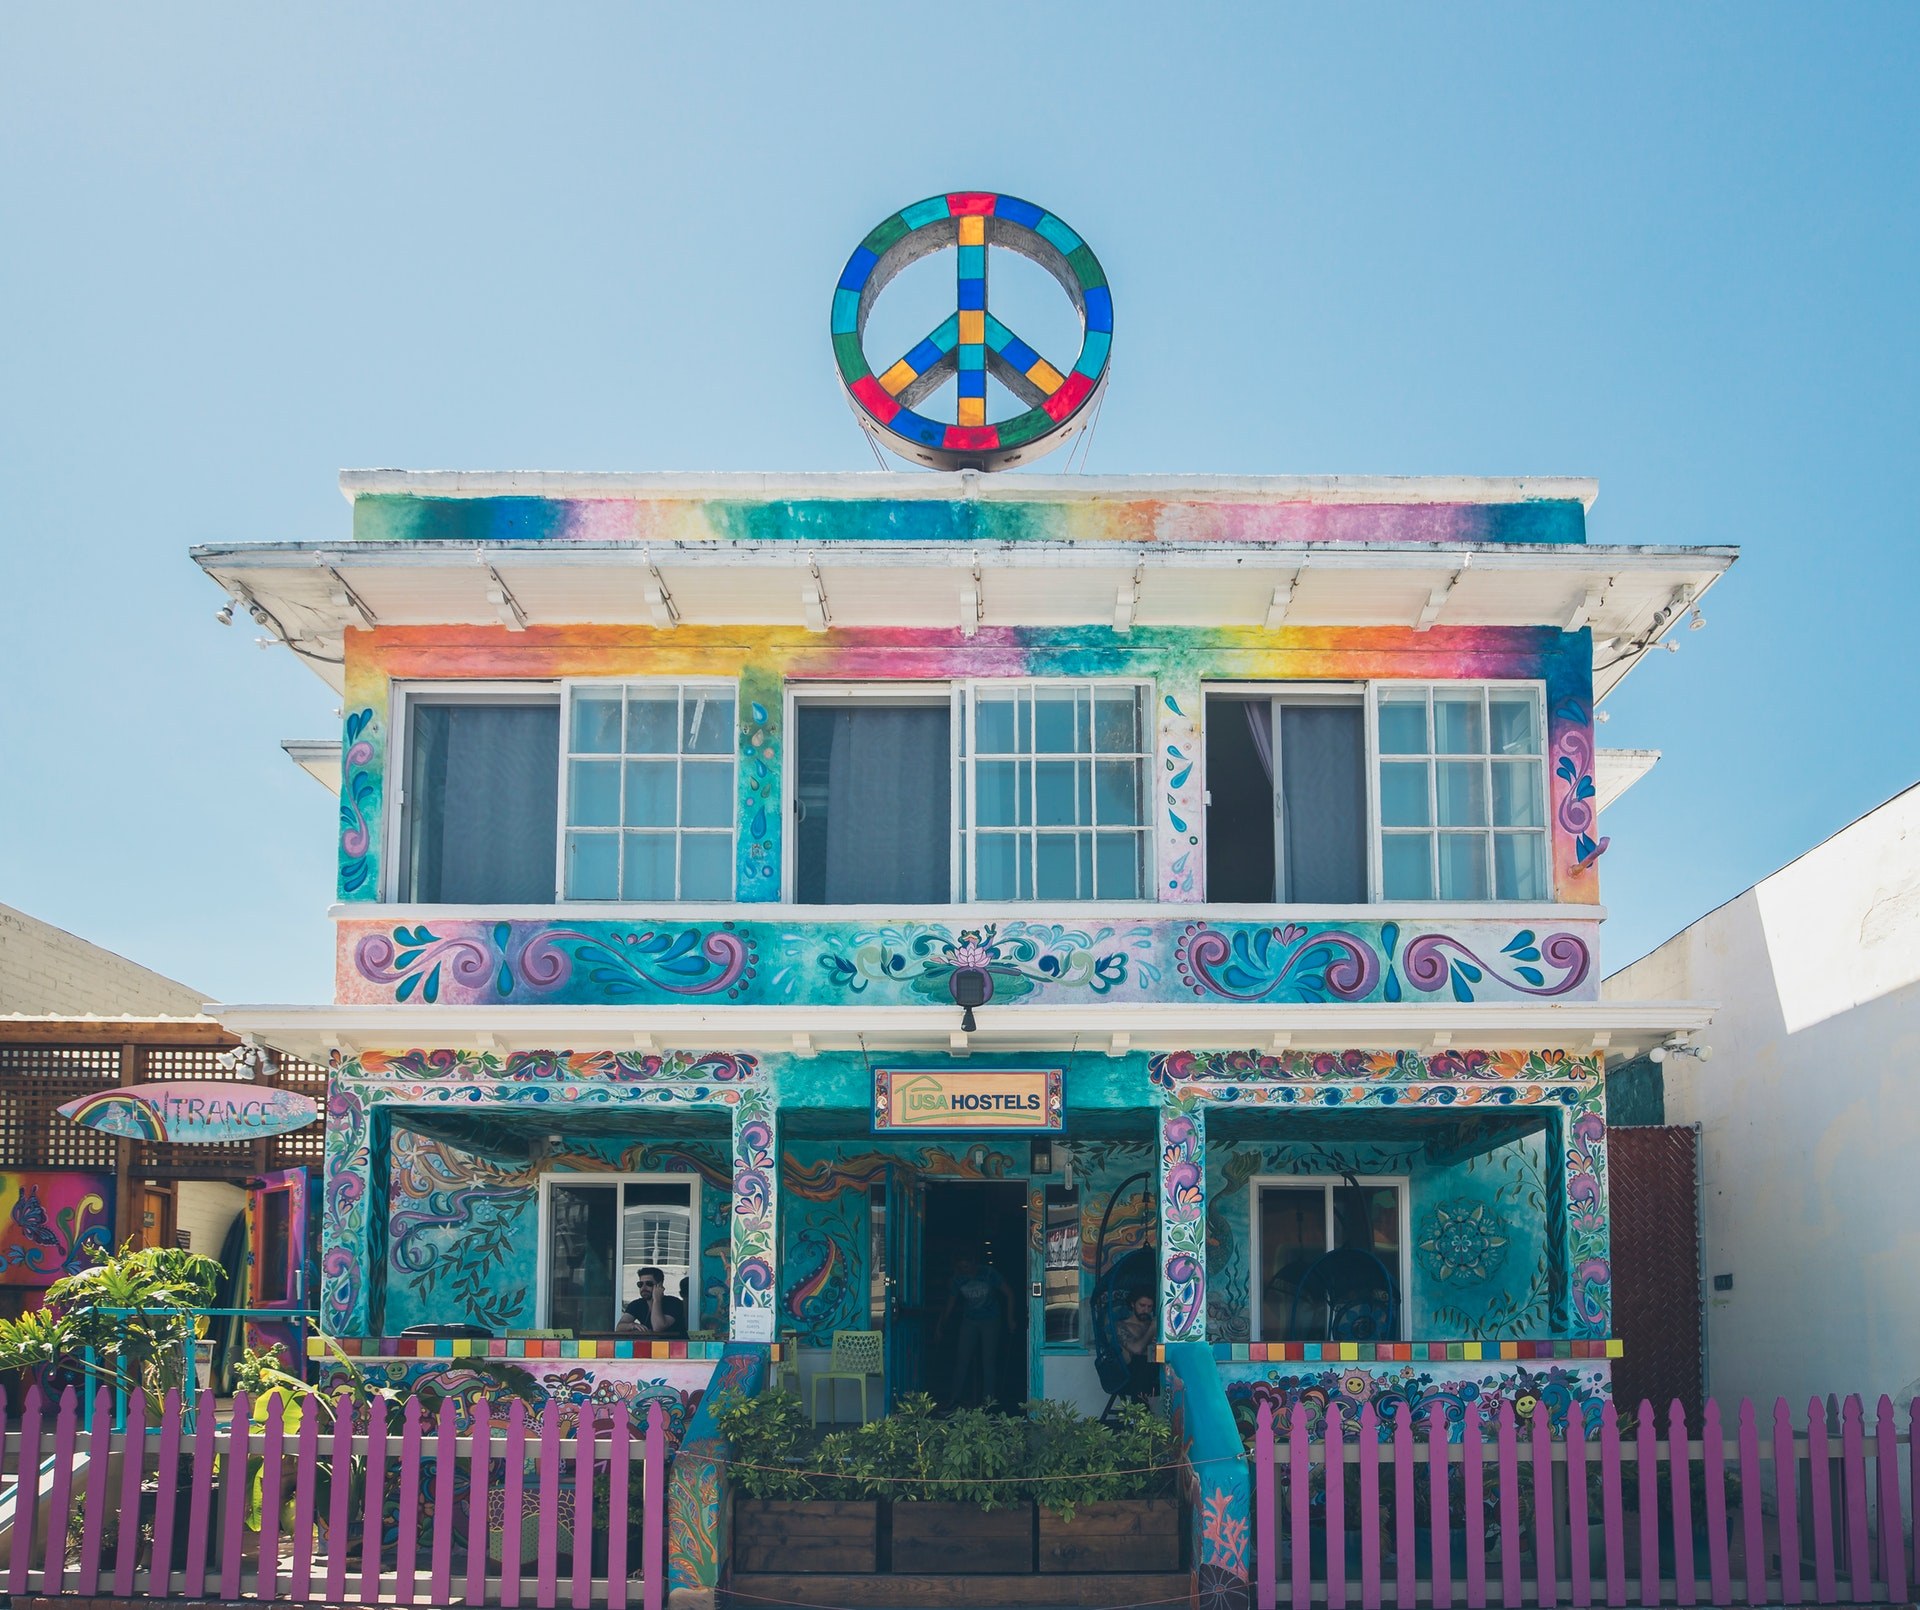 A Bed & Breakfast Fit for the Hippie in All of Us